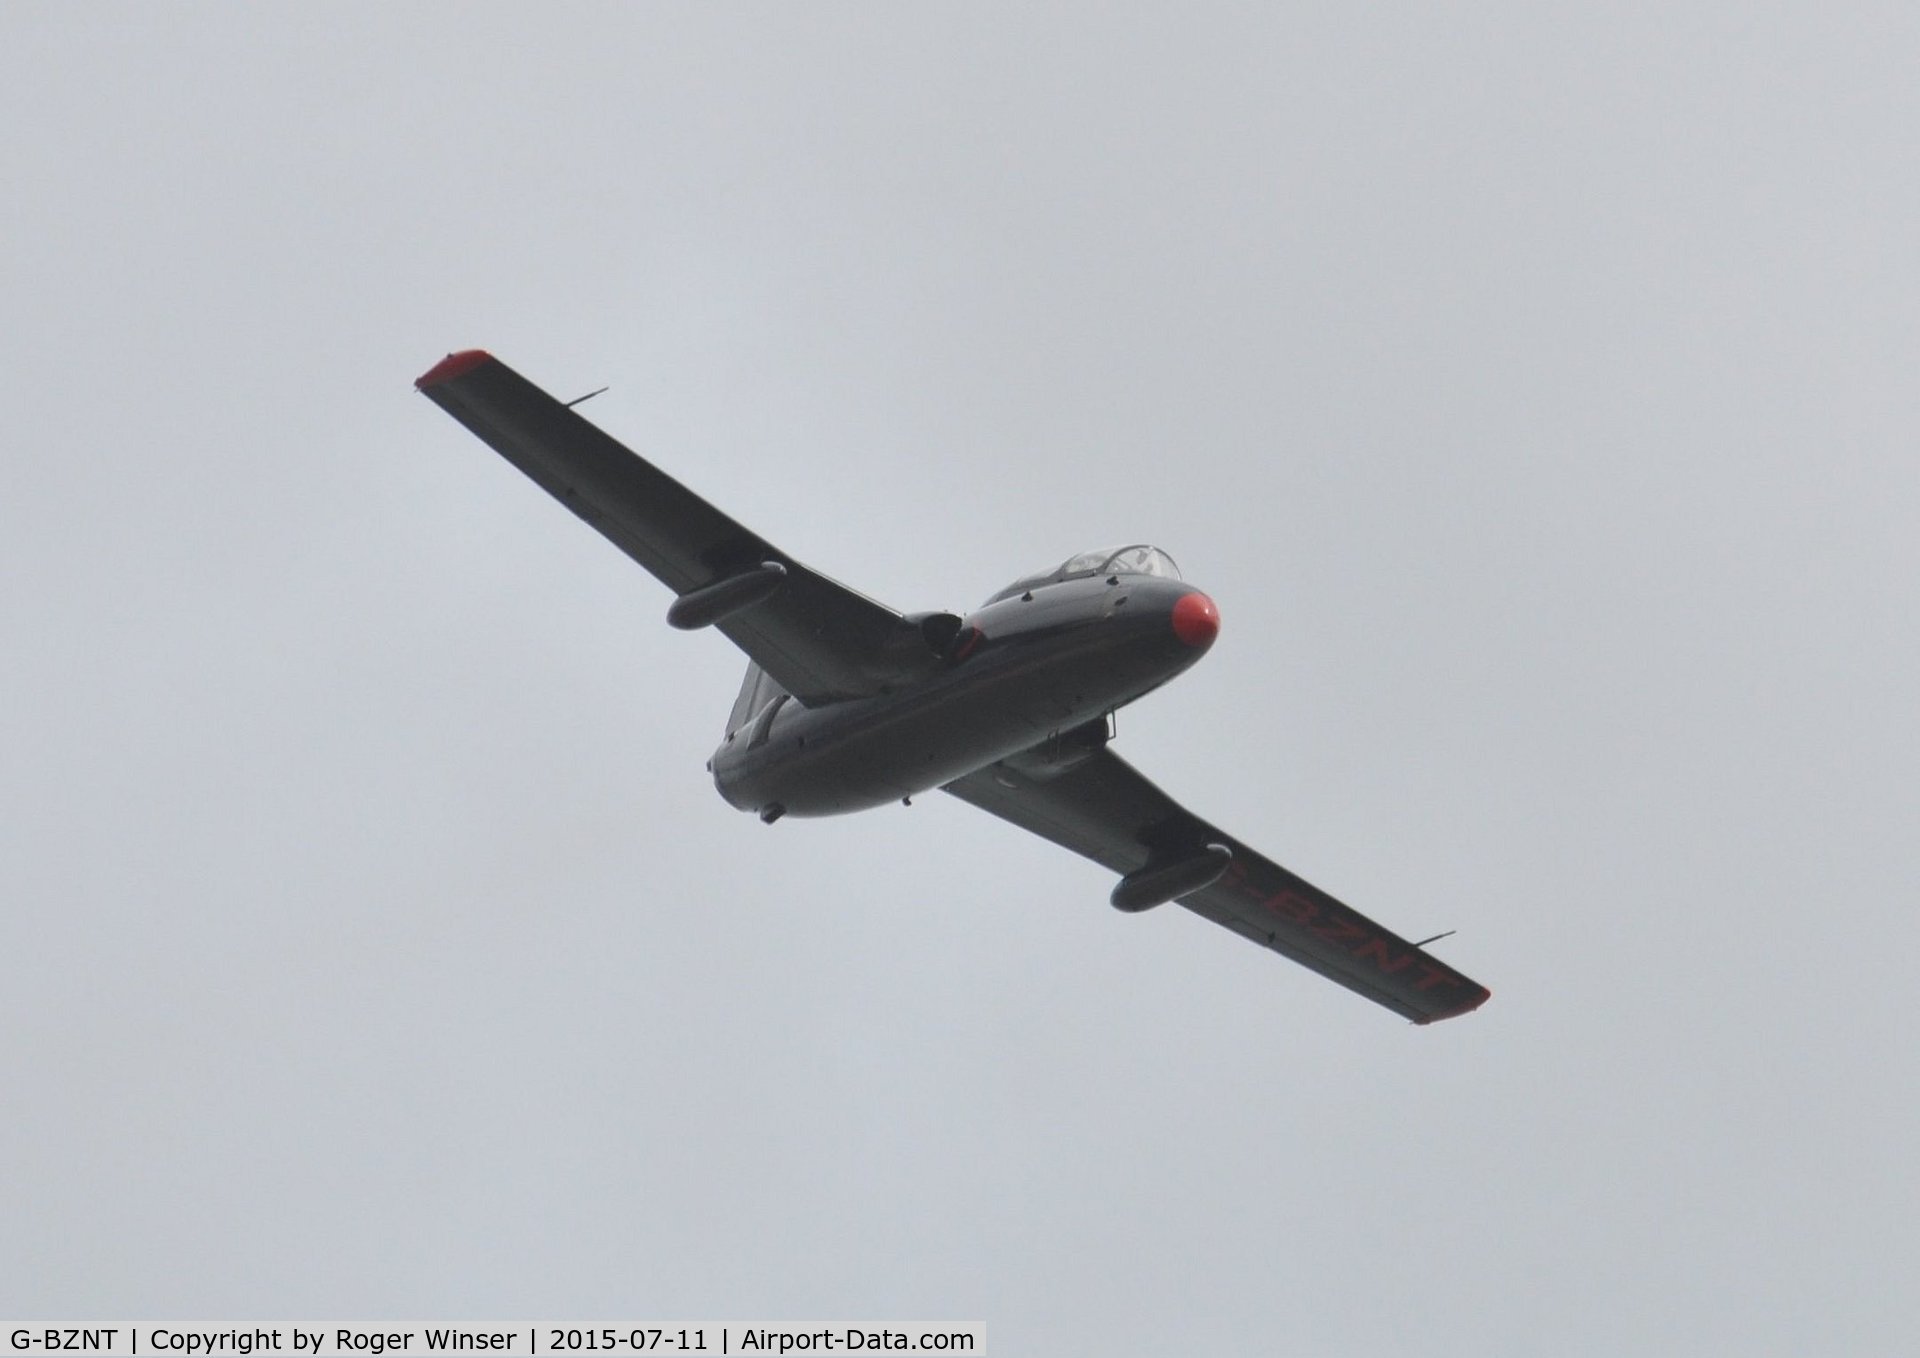 G-BZNT, 1968 Aero L-29 Delfin C/N 893019, Off airport. Displaying on the first day of the Wales National Airshow 2015 held over Swansea Bay.